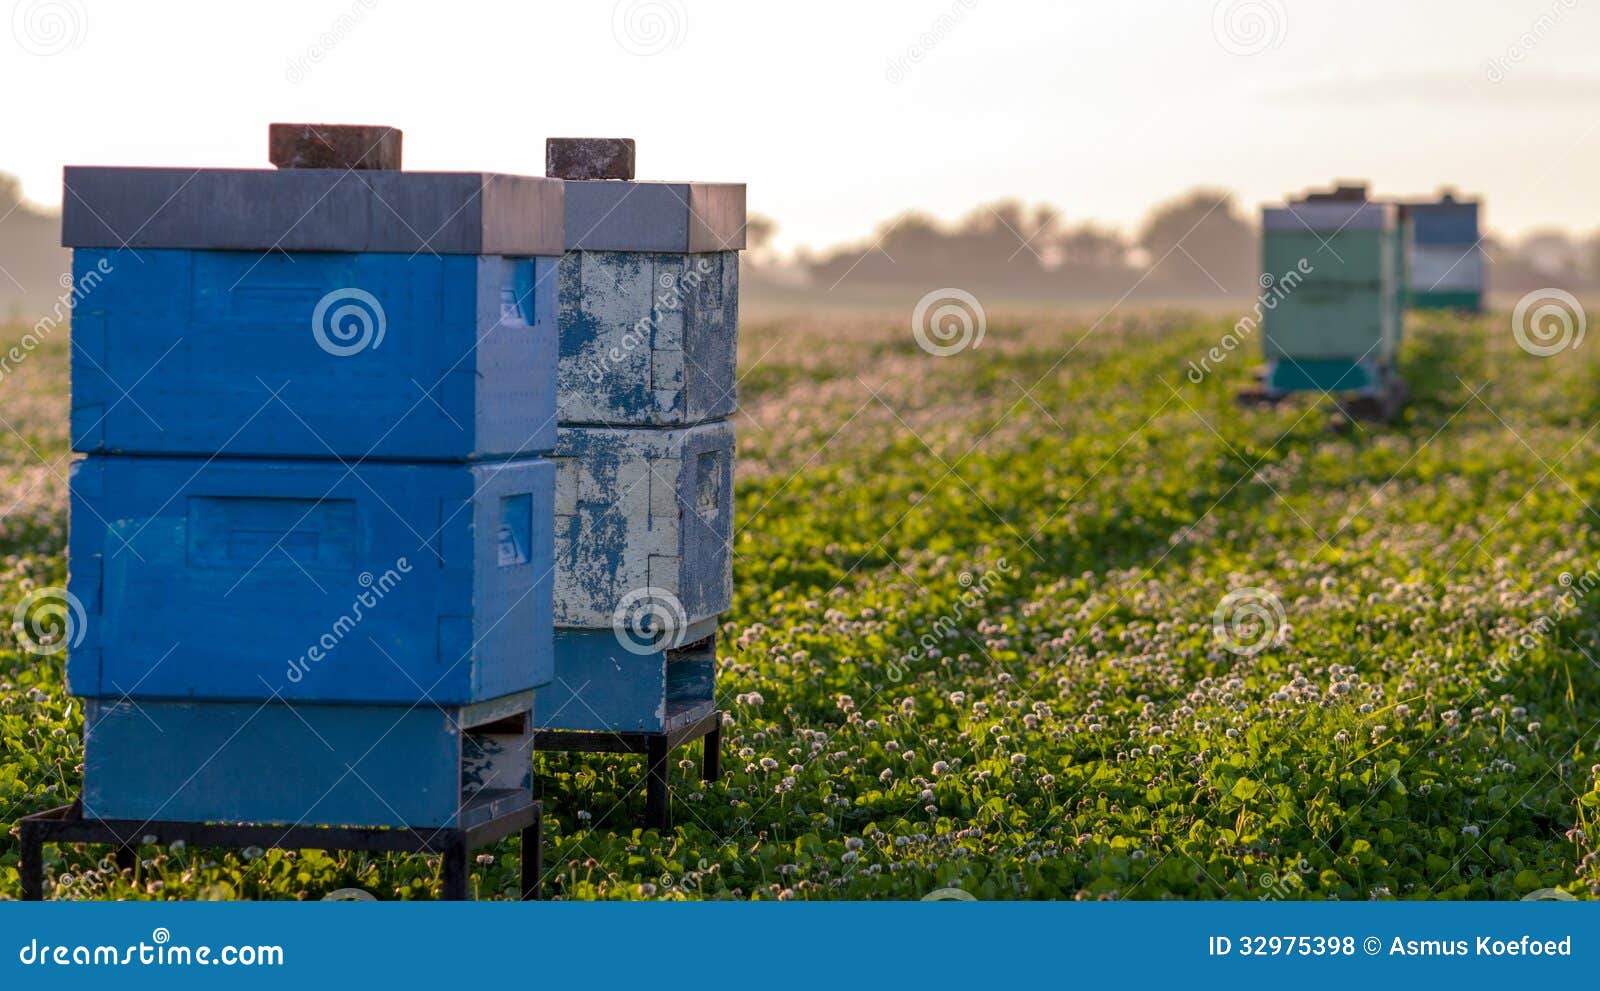 bee hives for pollination